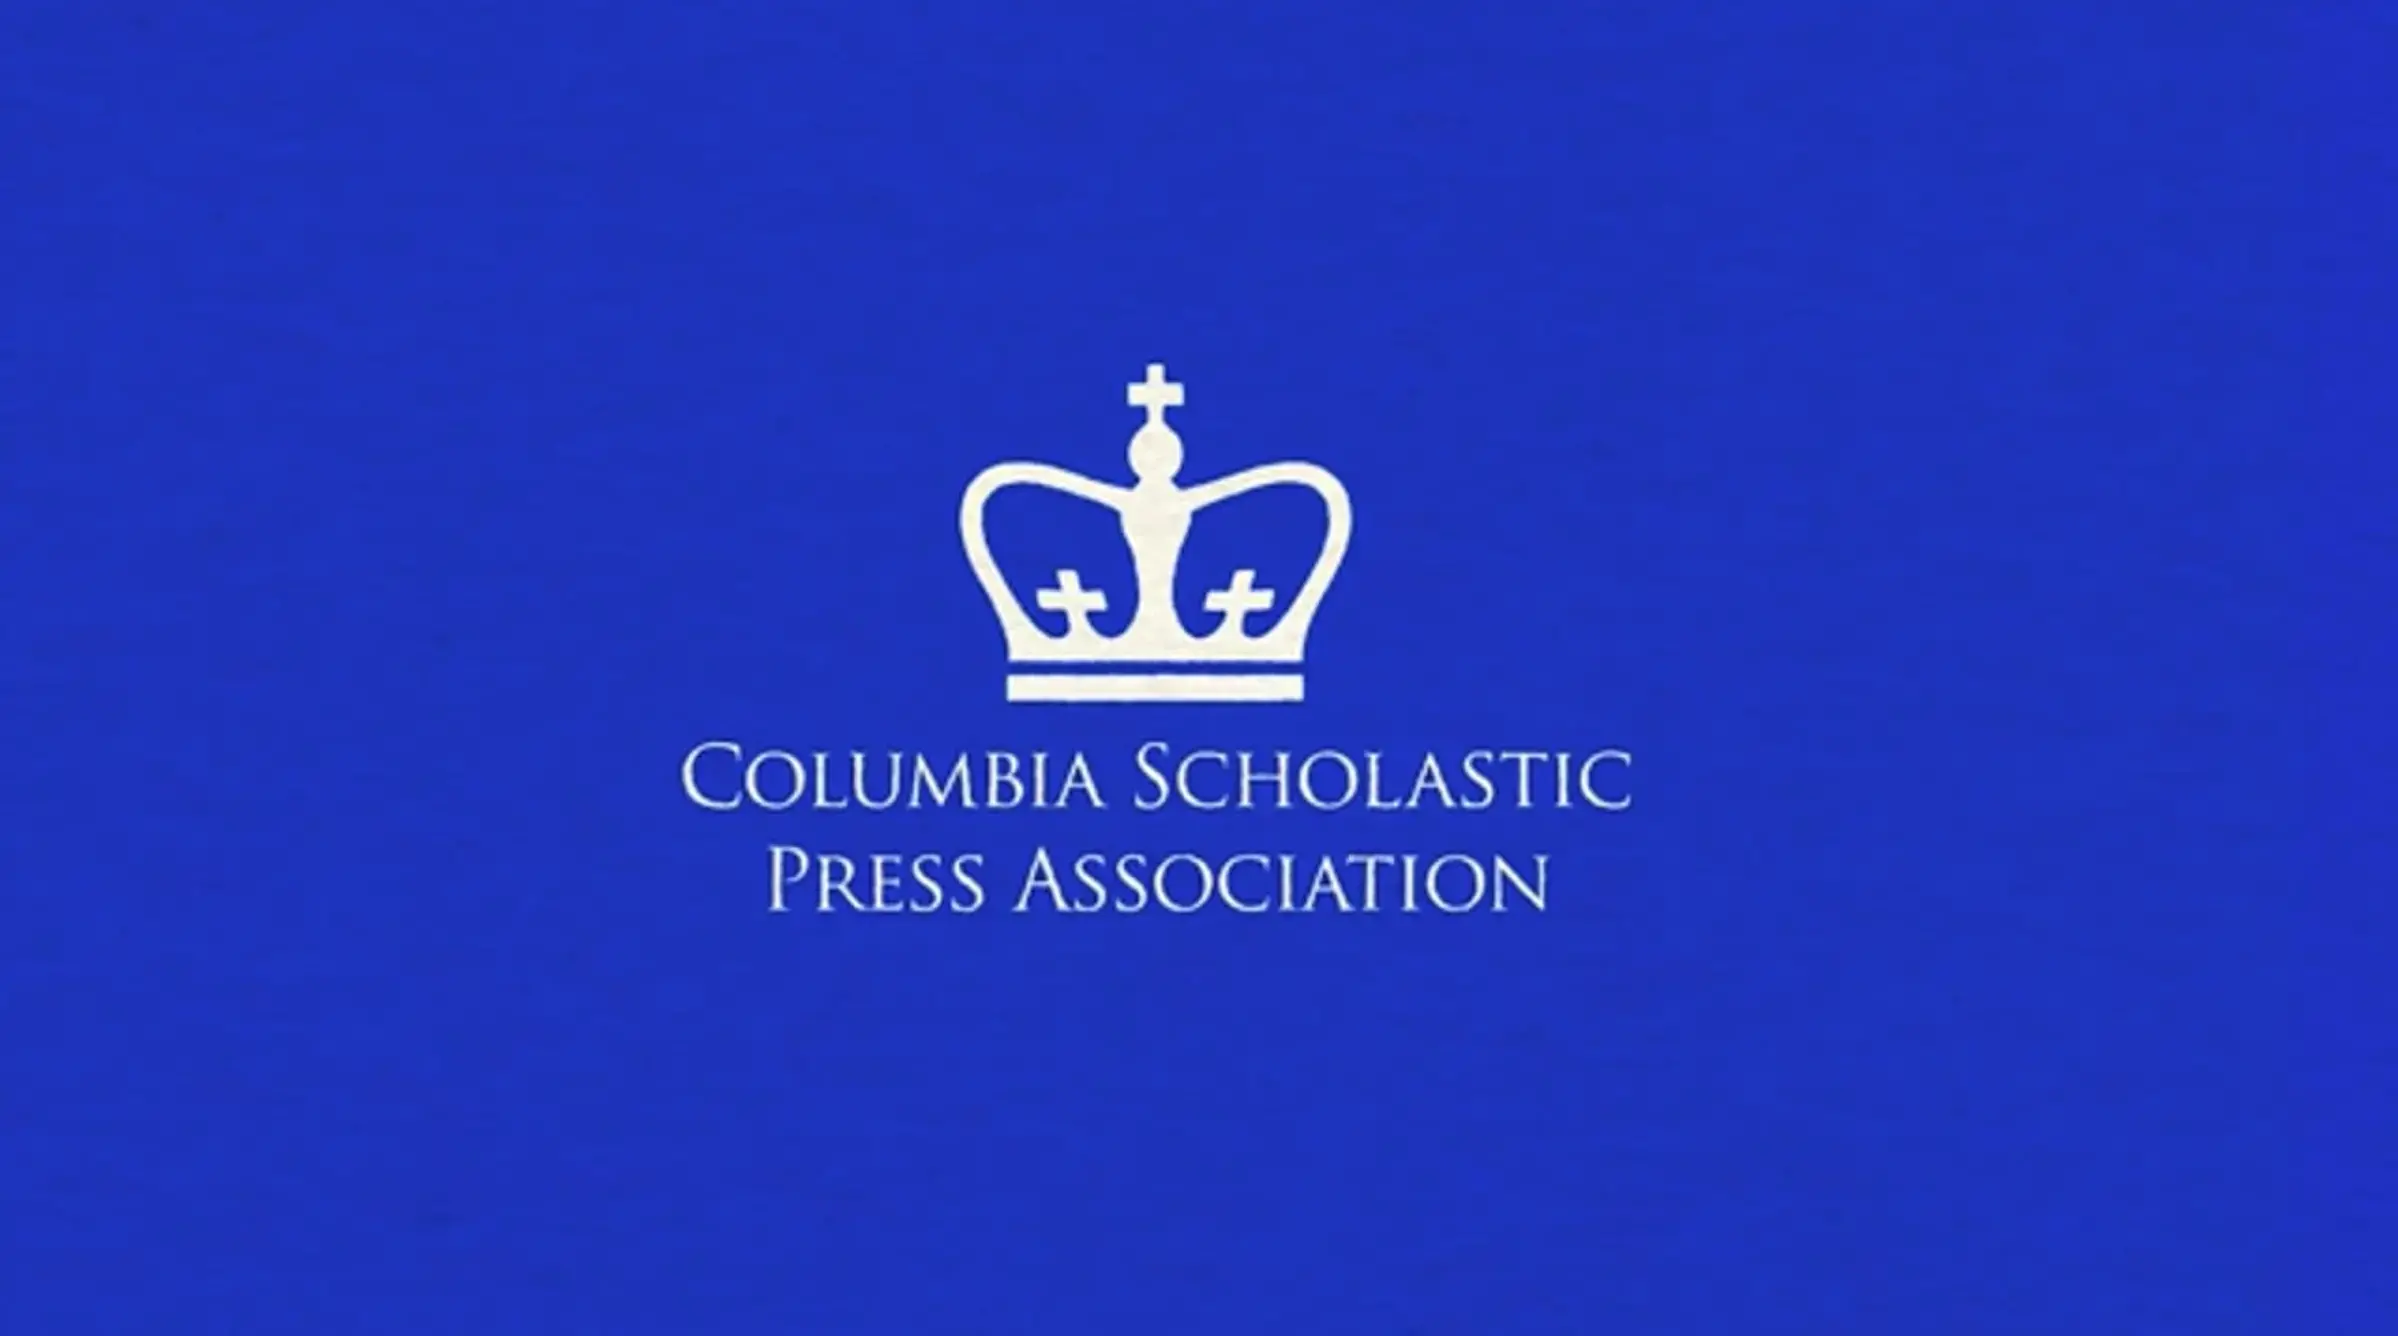 The CSPA Student Experience